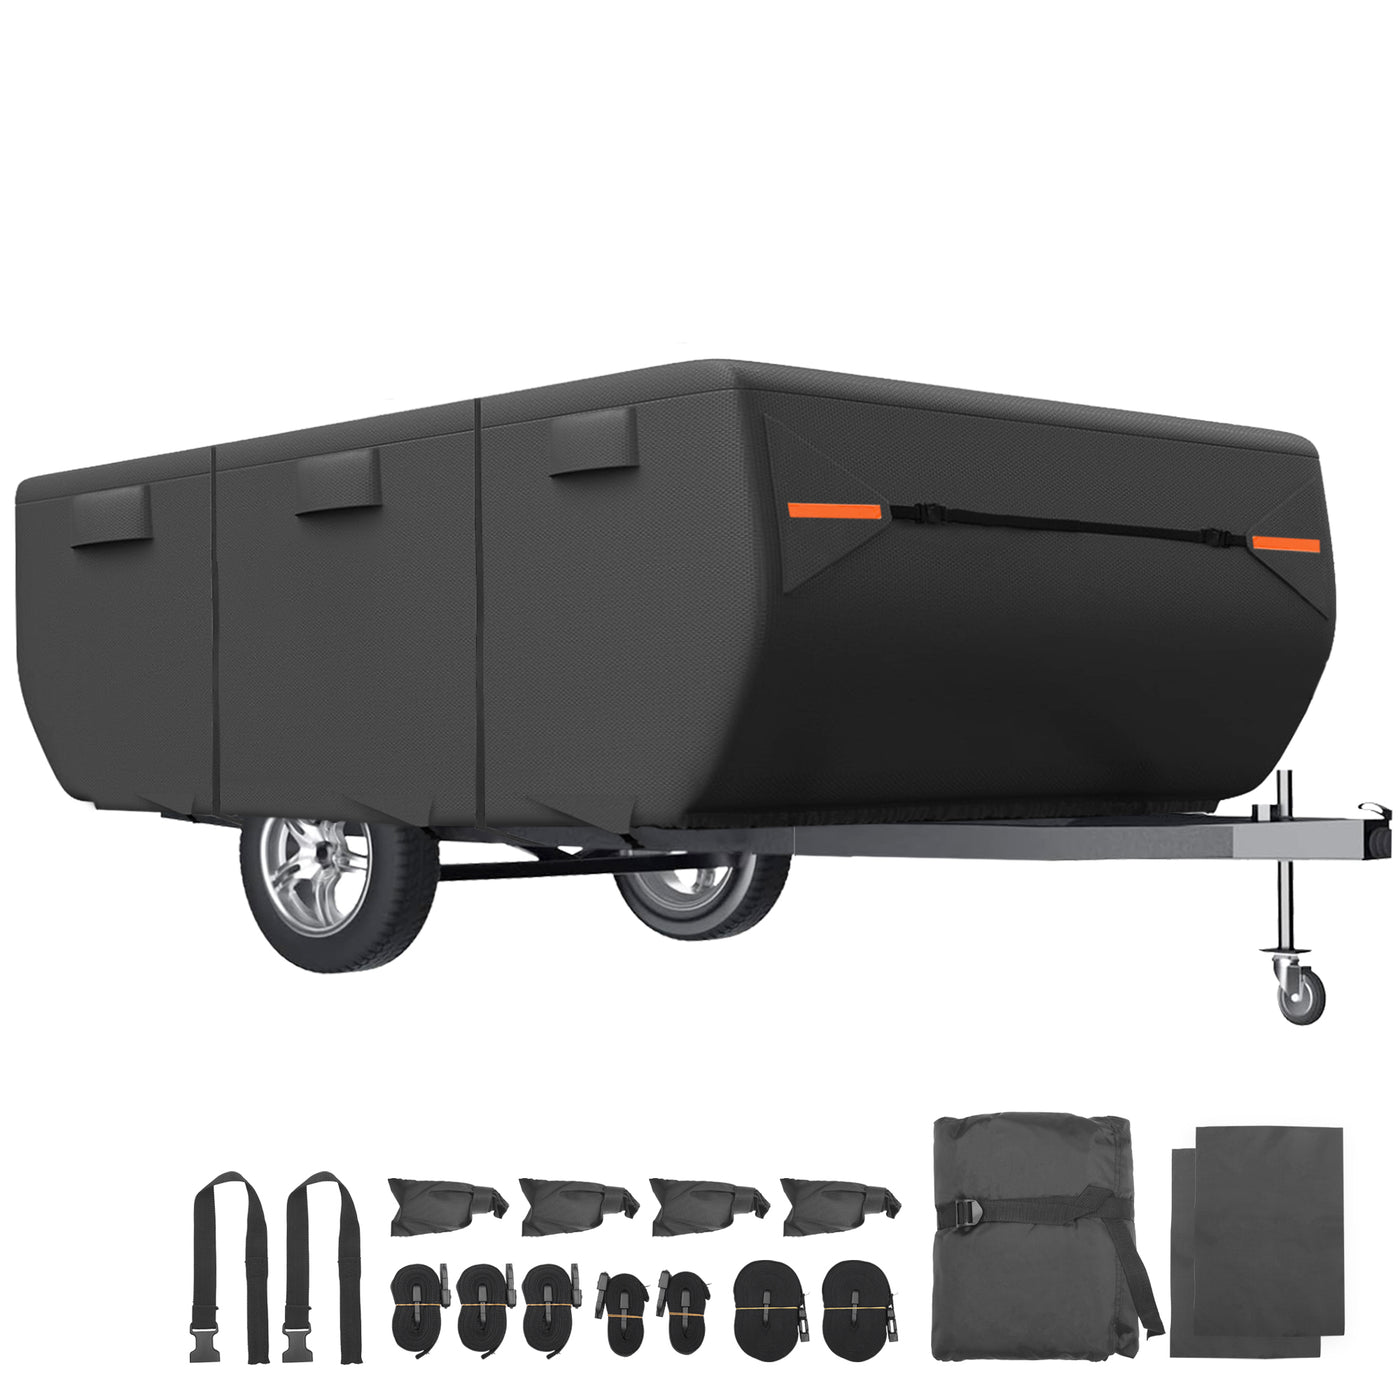 uxcell Uxcell Waterproof Pop-up Camper Trailer Cover Fits 12'-14' RV Cover Anti-UV with 3+2 Straps and Air Vents Protection for Motorhome Black